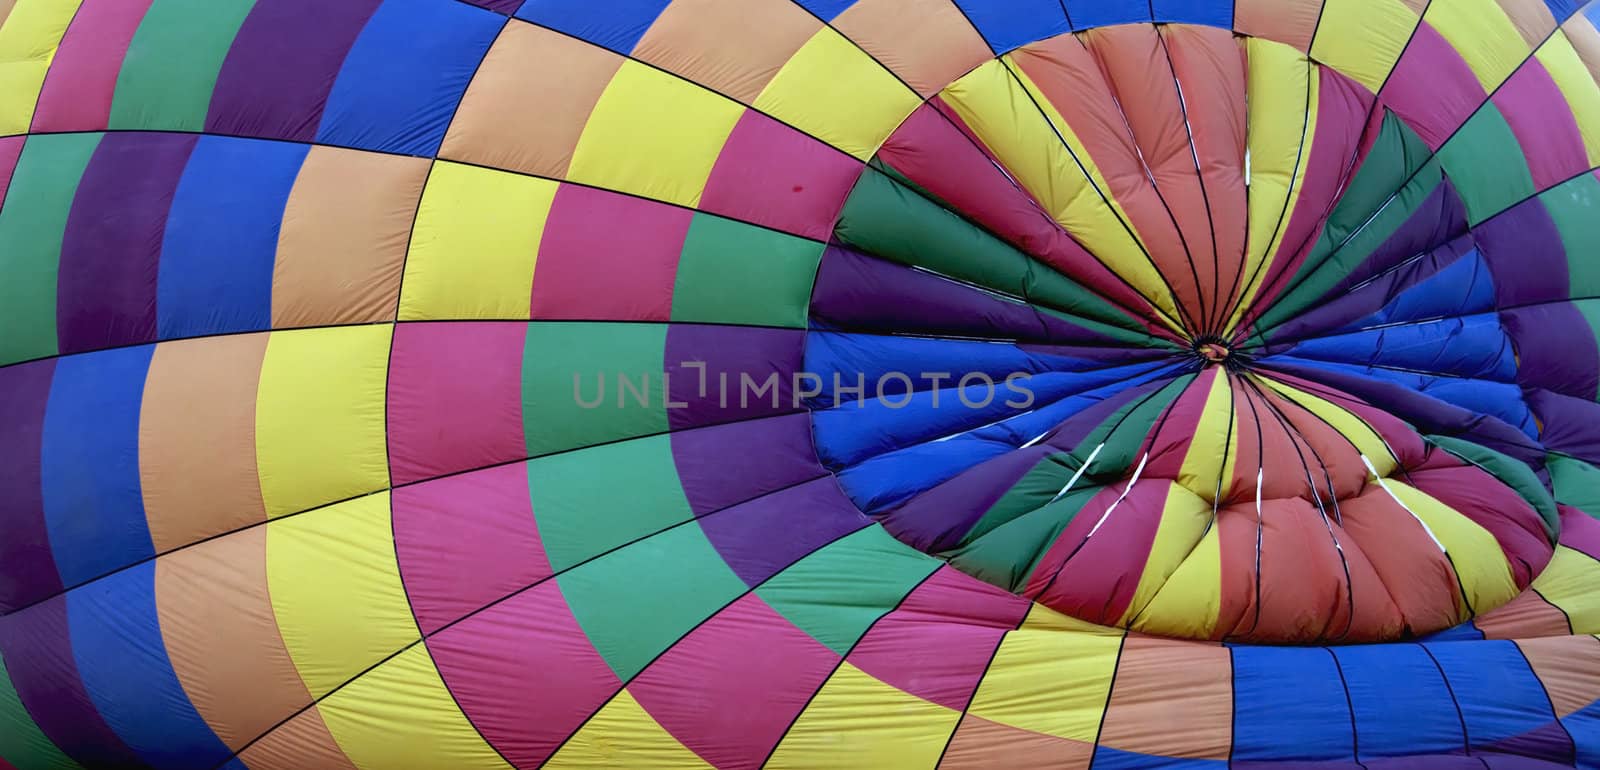 grounded hot air balloon texture, cloth, material, multi-colors, panoramic, landscape